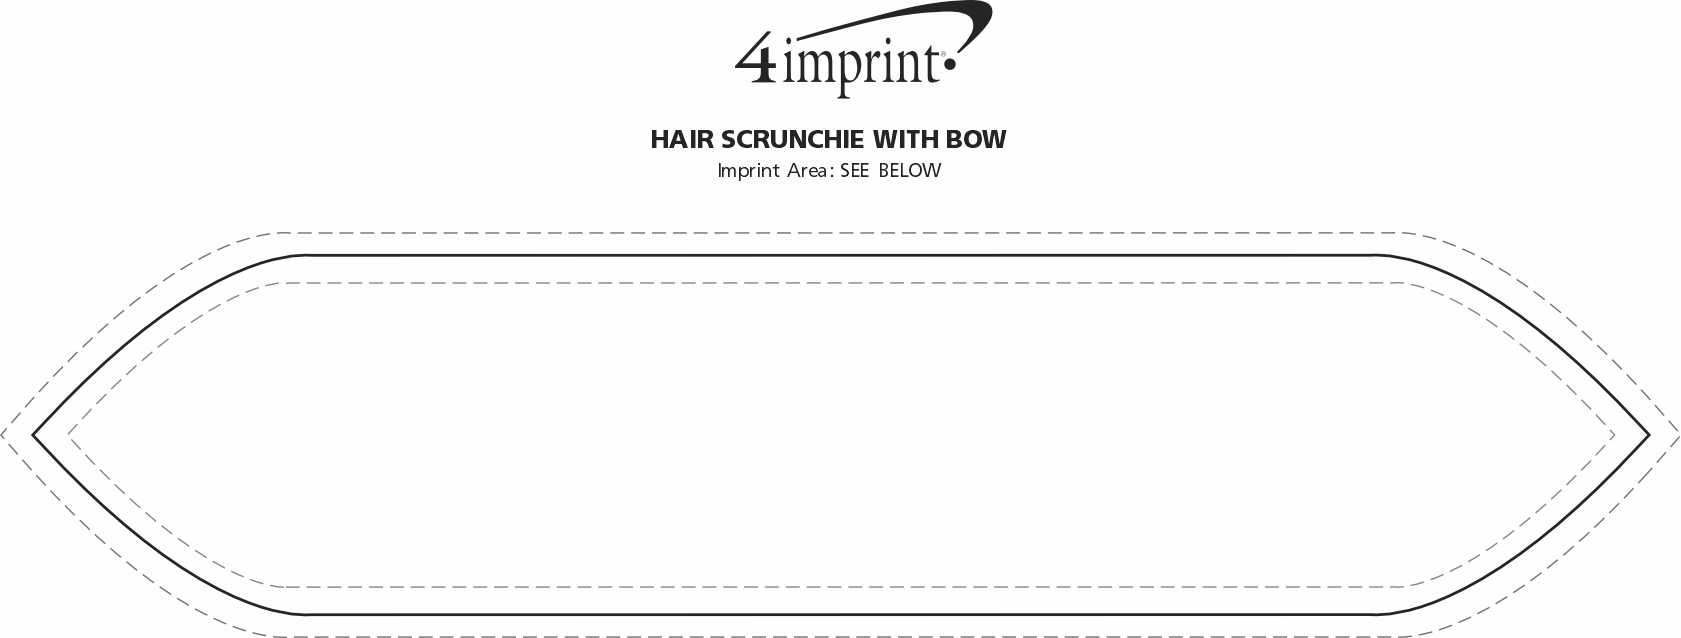 Imprint Area of Hair Scrunchie with Bow